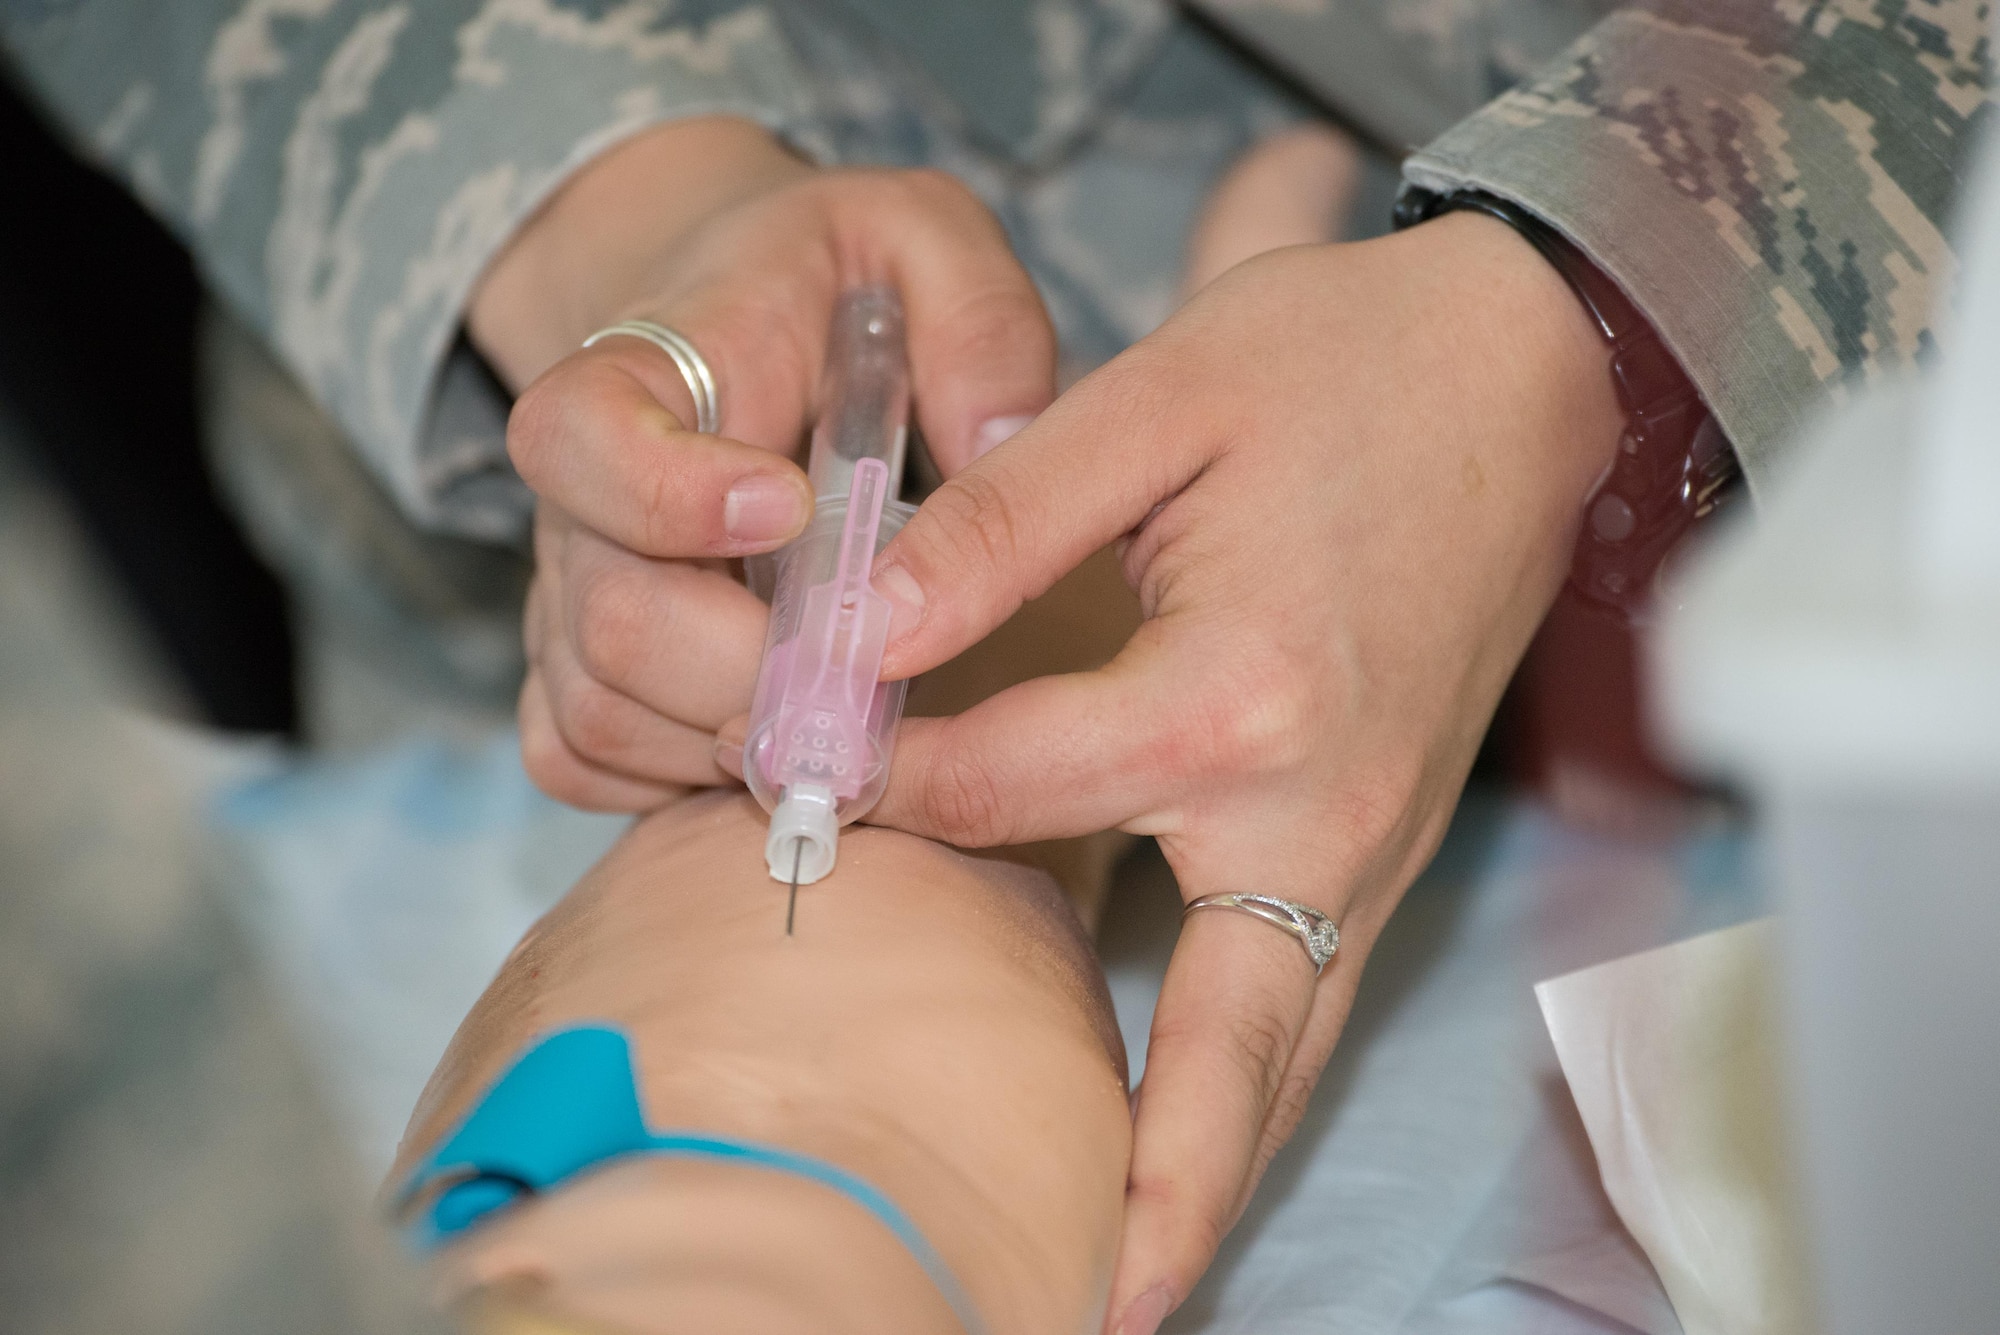 A U.S. Airman simulates drawing blood during a 36th Medical Group training day June 8, 2017, at Andersen Air Force Base, Guam. In addition to drawing blood, the Airmen from the 36th MDG and 159th MDG, Naval Air Station Joint Reserve Base New Orleans, La., practiced skills such as suturing, inserting catheters with sterile technique, preparing casts and more. (U.S. Air Force photo by Airman 1st Class Jacob Skovo)